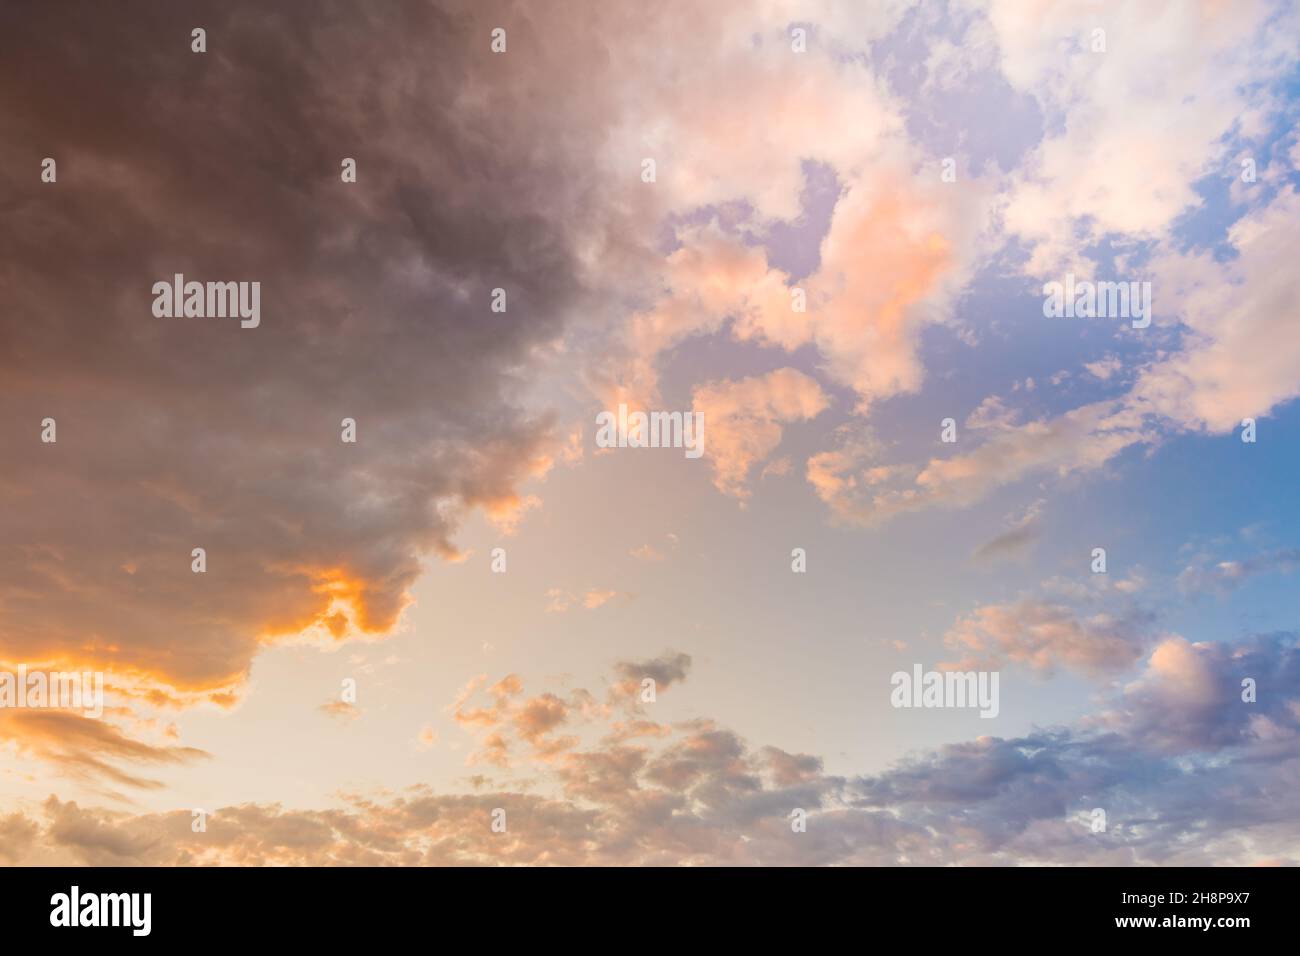 Wide angle view of sunset sunrise sky. Colorful sunset twilight sky, bright sun. Nature sky backgrounds. Idyllic relaxing tranquil freedom concept Stock Photo